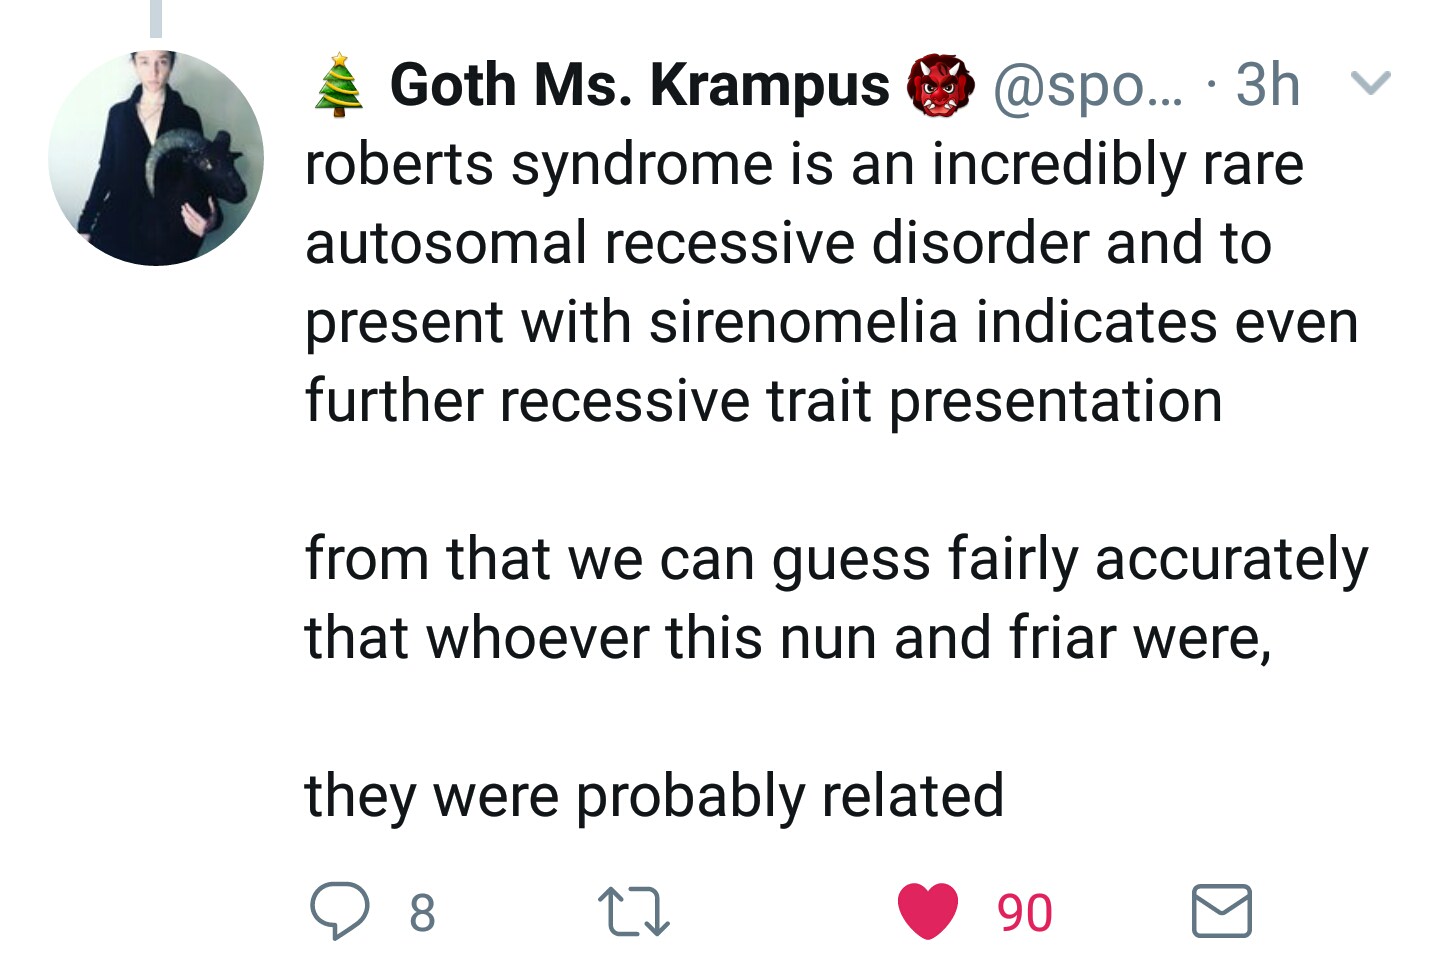 angle - Goth Ms. Krampus ... 3h v roberts syndrome is an incredibly rare autosomal recessive disorder and to present with sirenomelia indicates even further recessive trait presentation from that we can guess fairly accurately that whoever this nun and fr